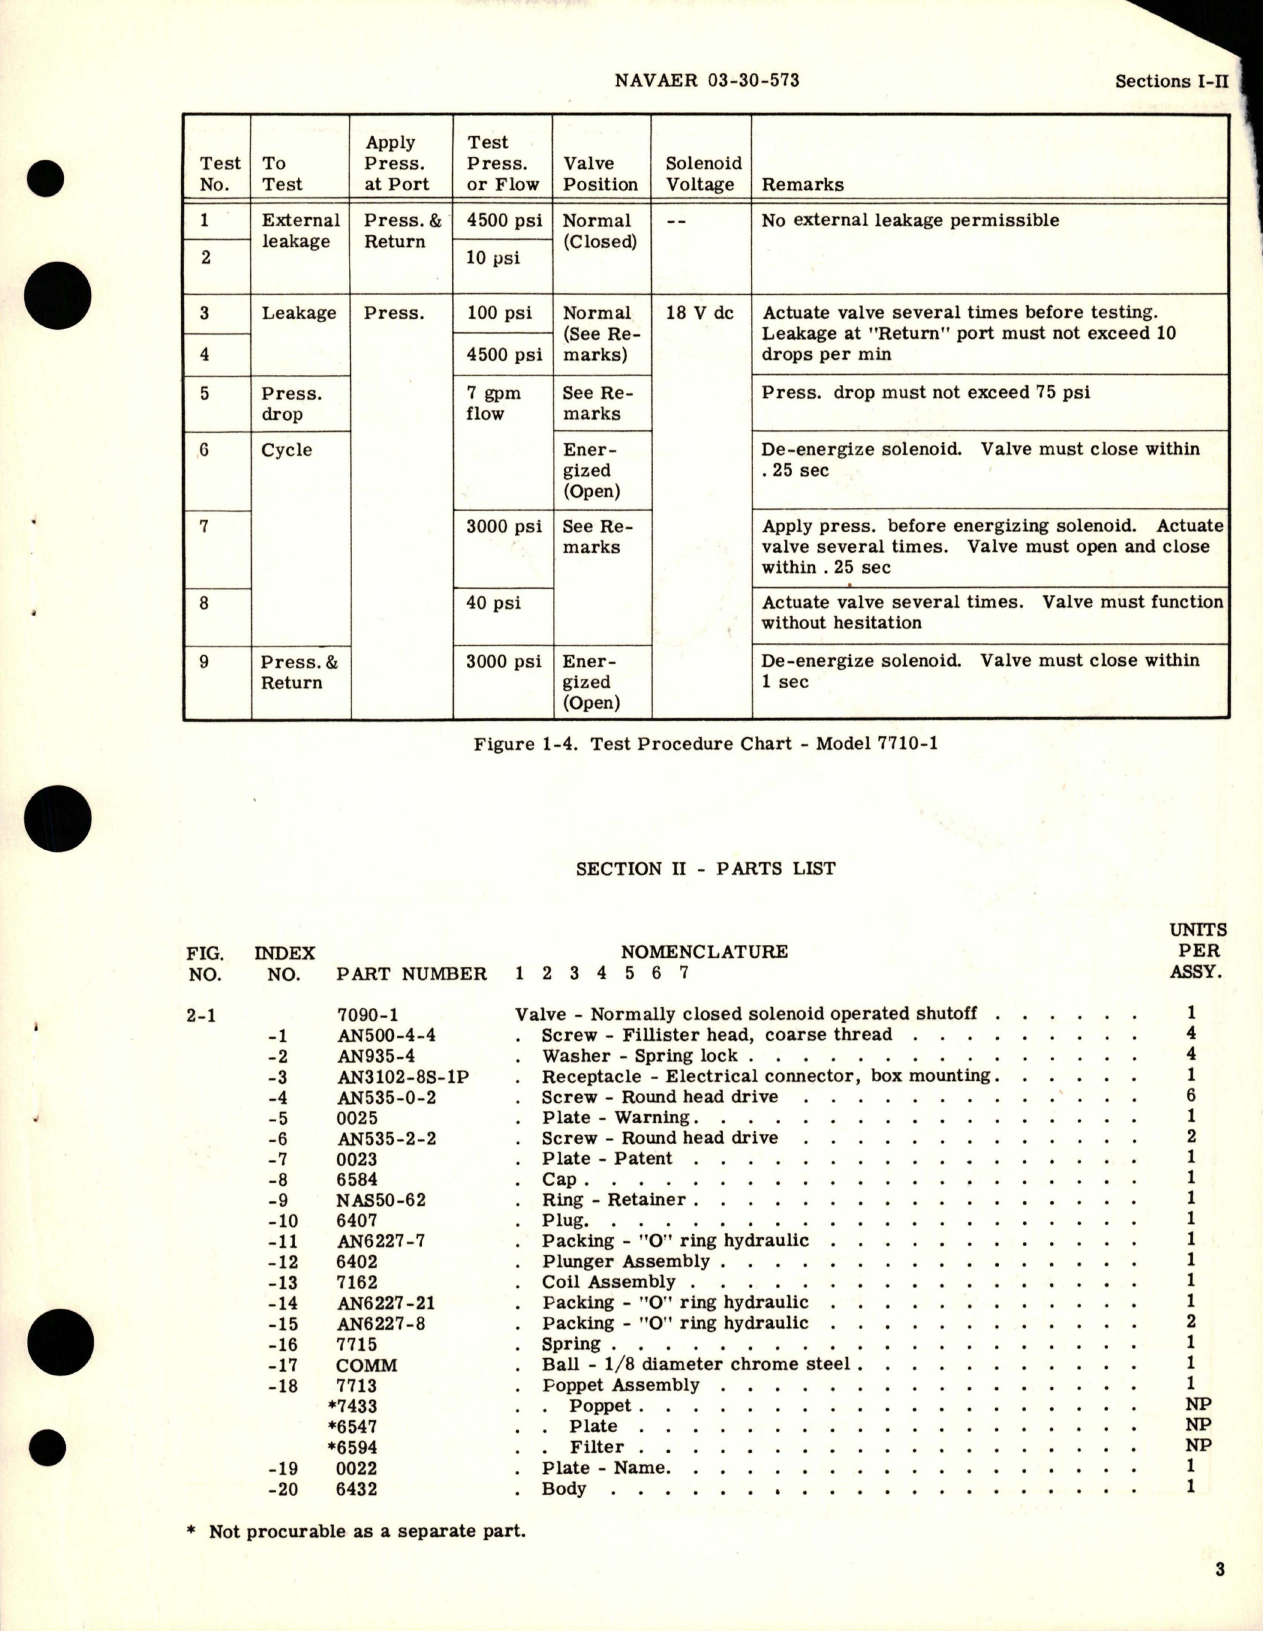 Sample page 5 from AirCorps Library document: Overhaul Instructions with Parts Catalog for Normally Closed Solenoid Operated Shutoff Valves - Models 7090-1 and 7710-1